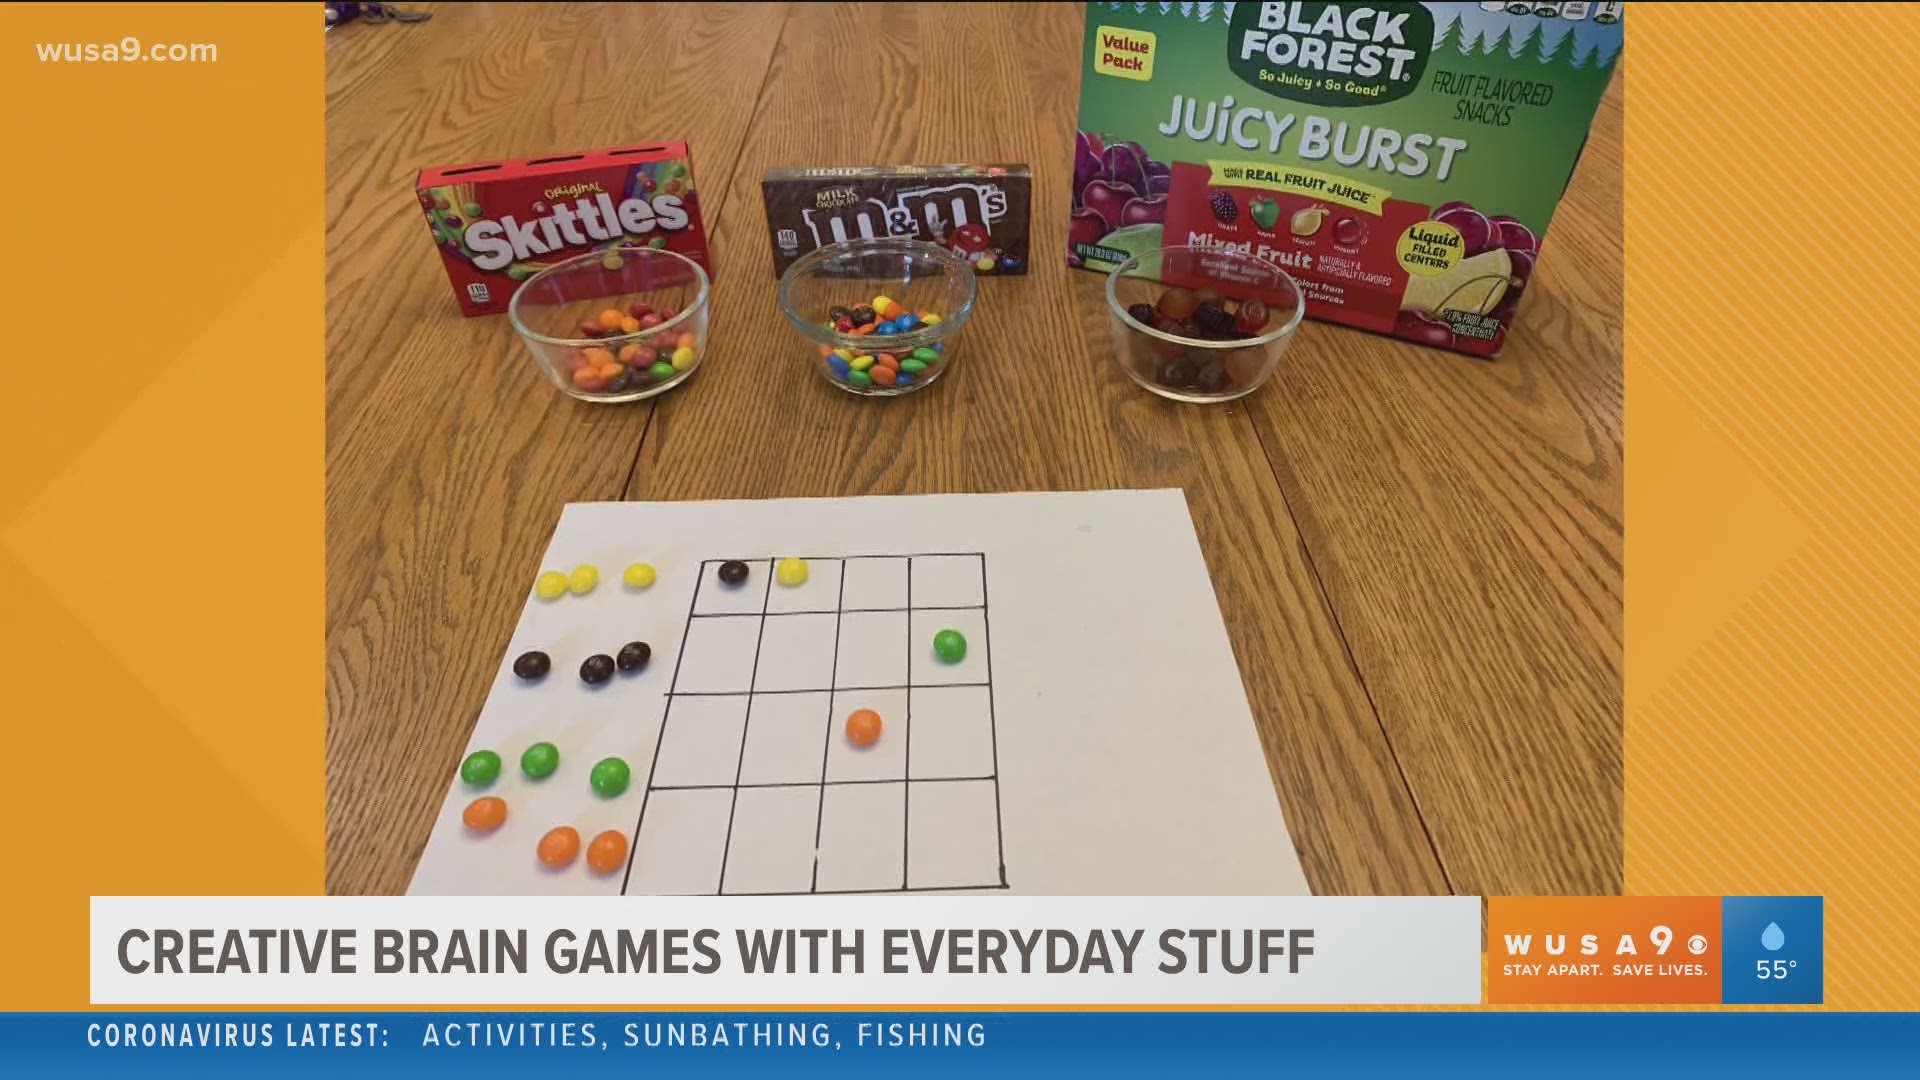 Maureen Loftus, Executive Director of LearningRx shares some fun games using common household items that can help keep you kids' brain skill sharp.